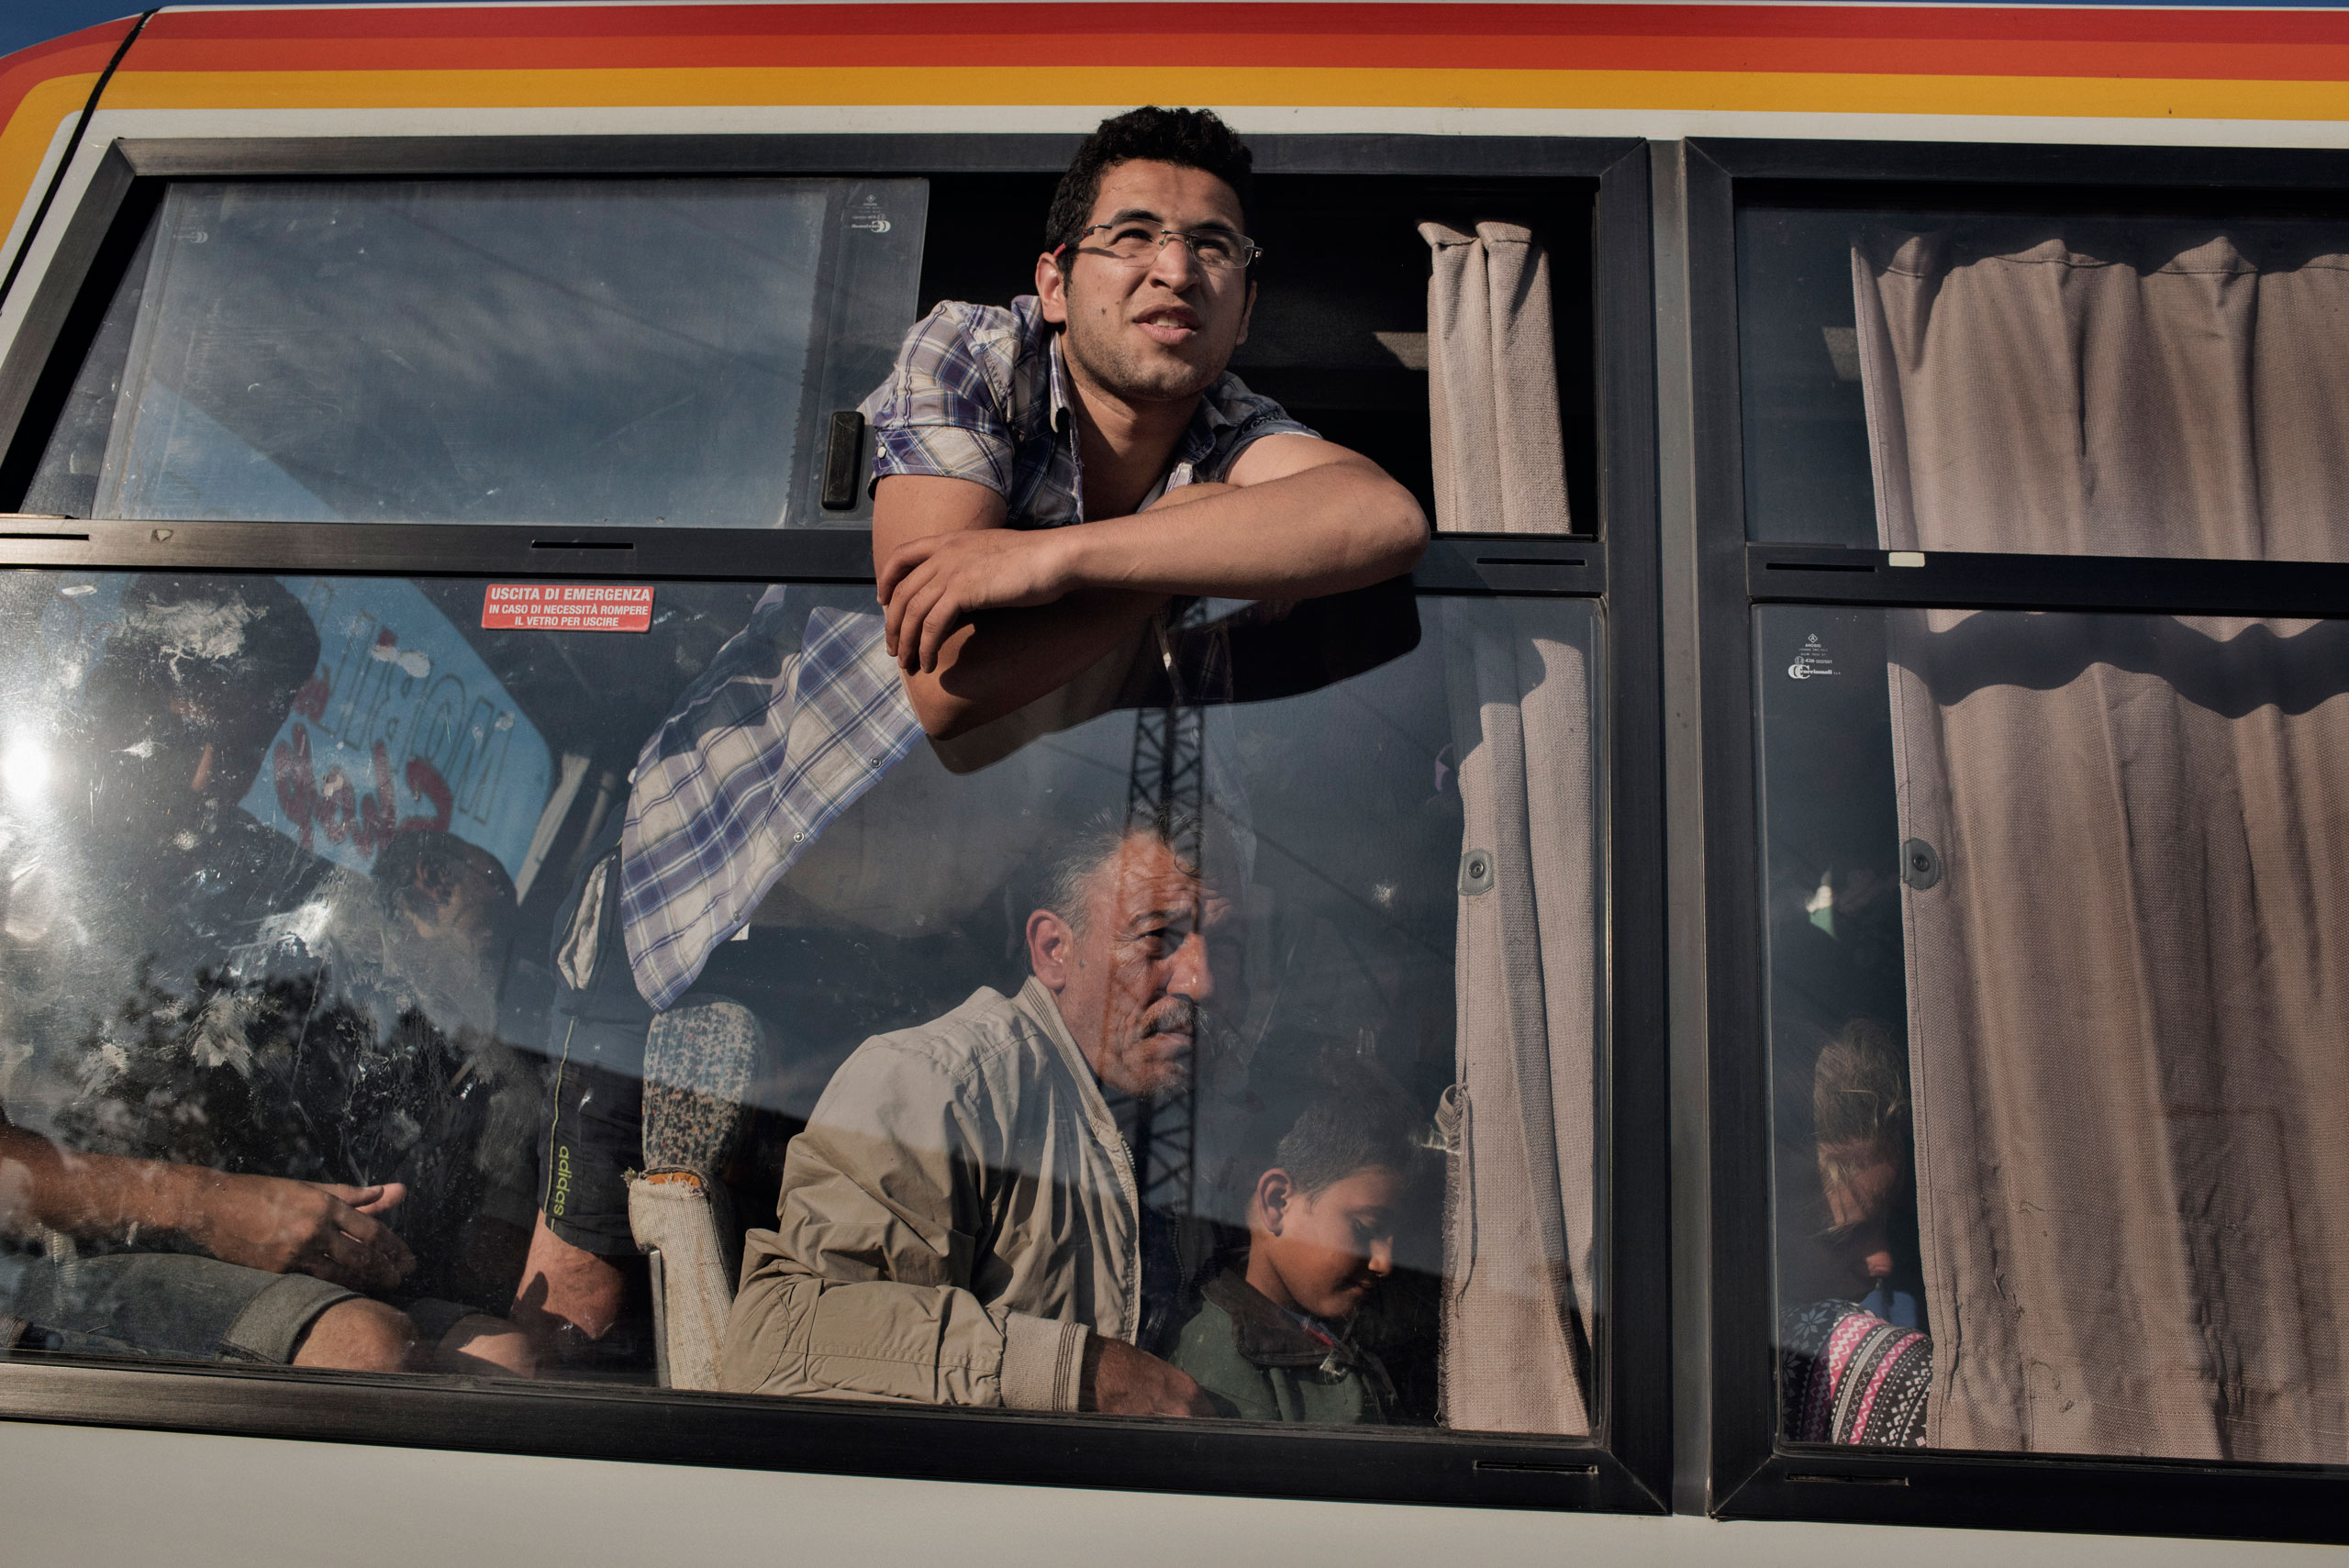 Ghafek Aiad Alsaho, a Syrian migrant, looks through the window of a police bus after border guards caught him crossing illegally from Serbia into Hungary on his way into the European Union in Roszke, Hungary, on Aug. 29, 2015. (Yuri Kozyrev—NOOR for TIME)